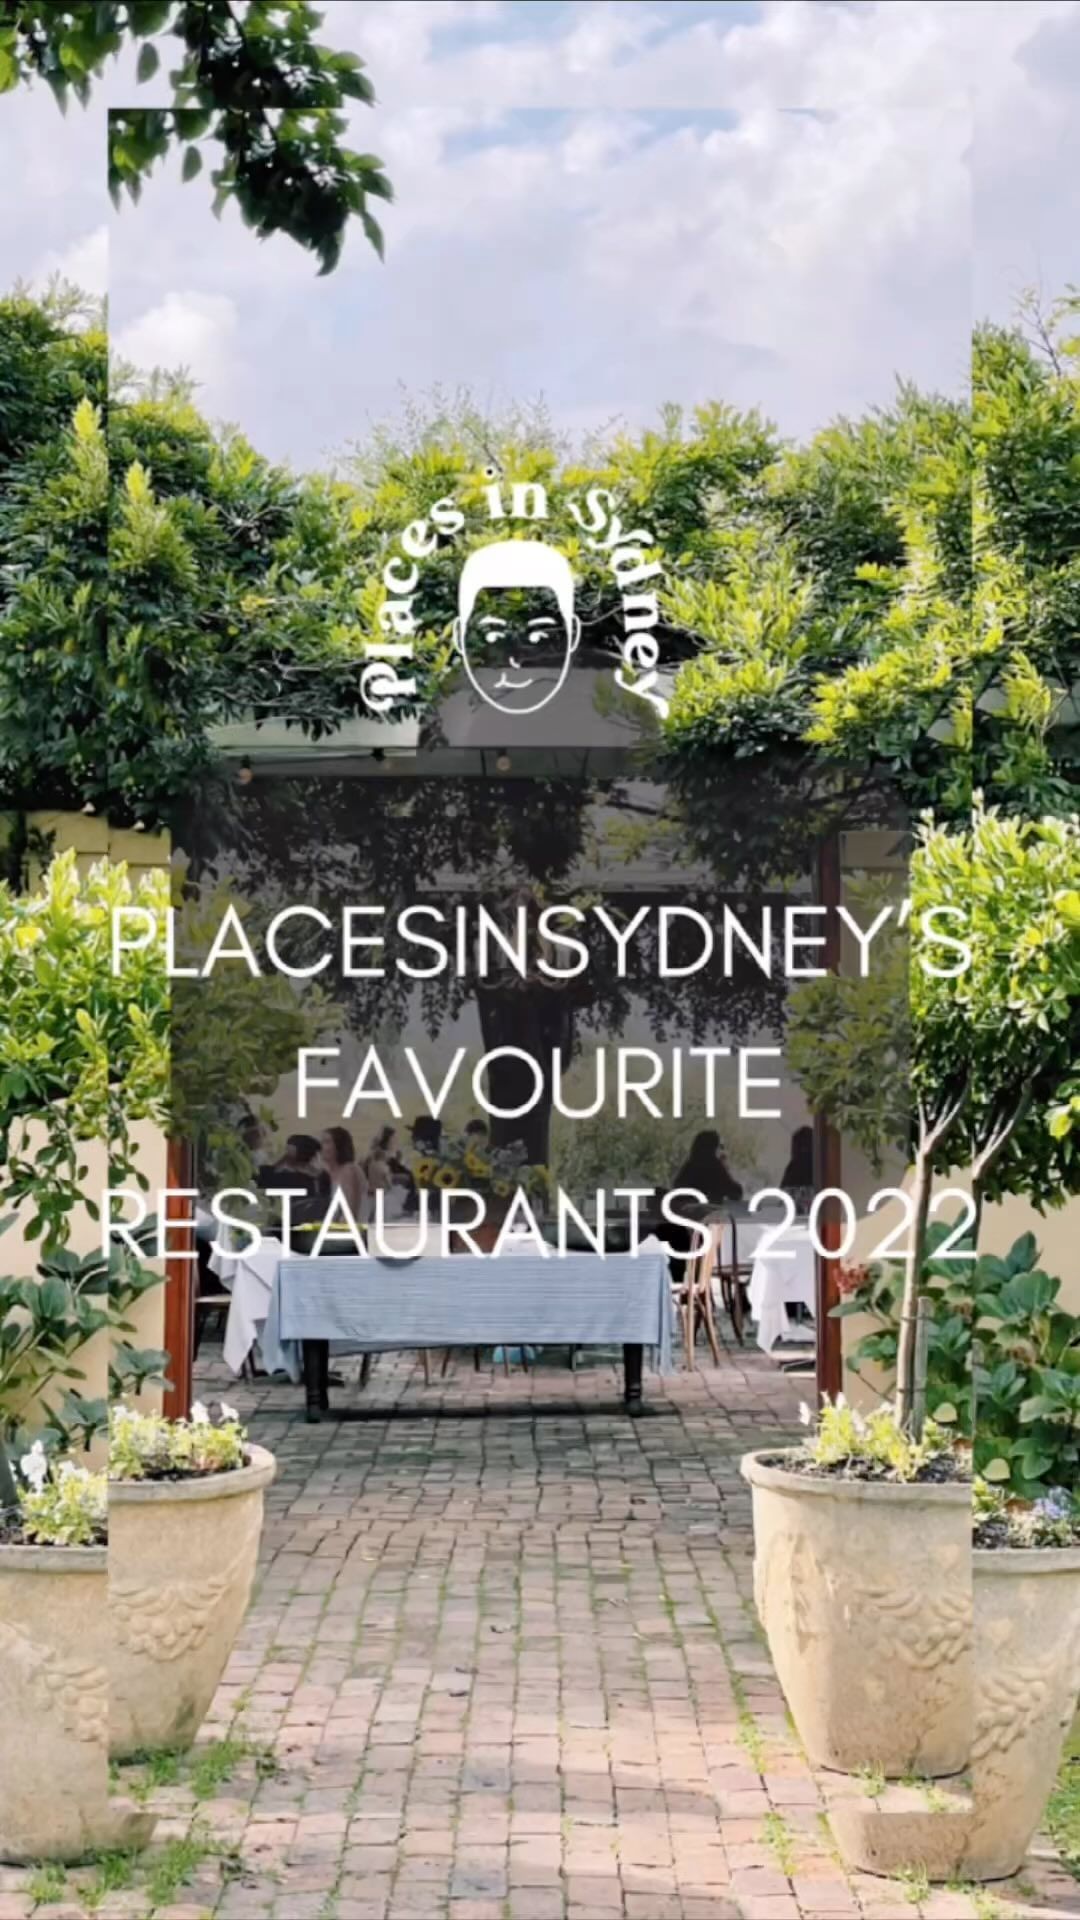 One of the top publications of @places_in_sydney which has 509 likes and 15 comments